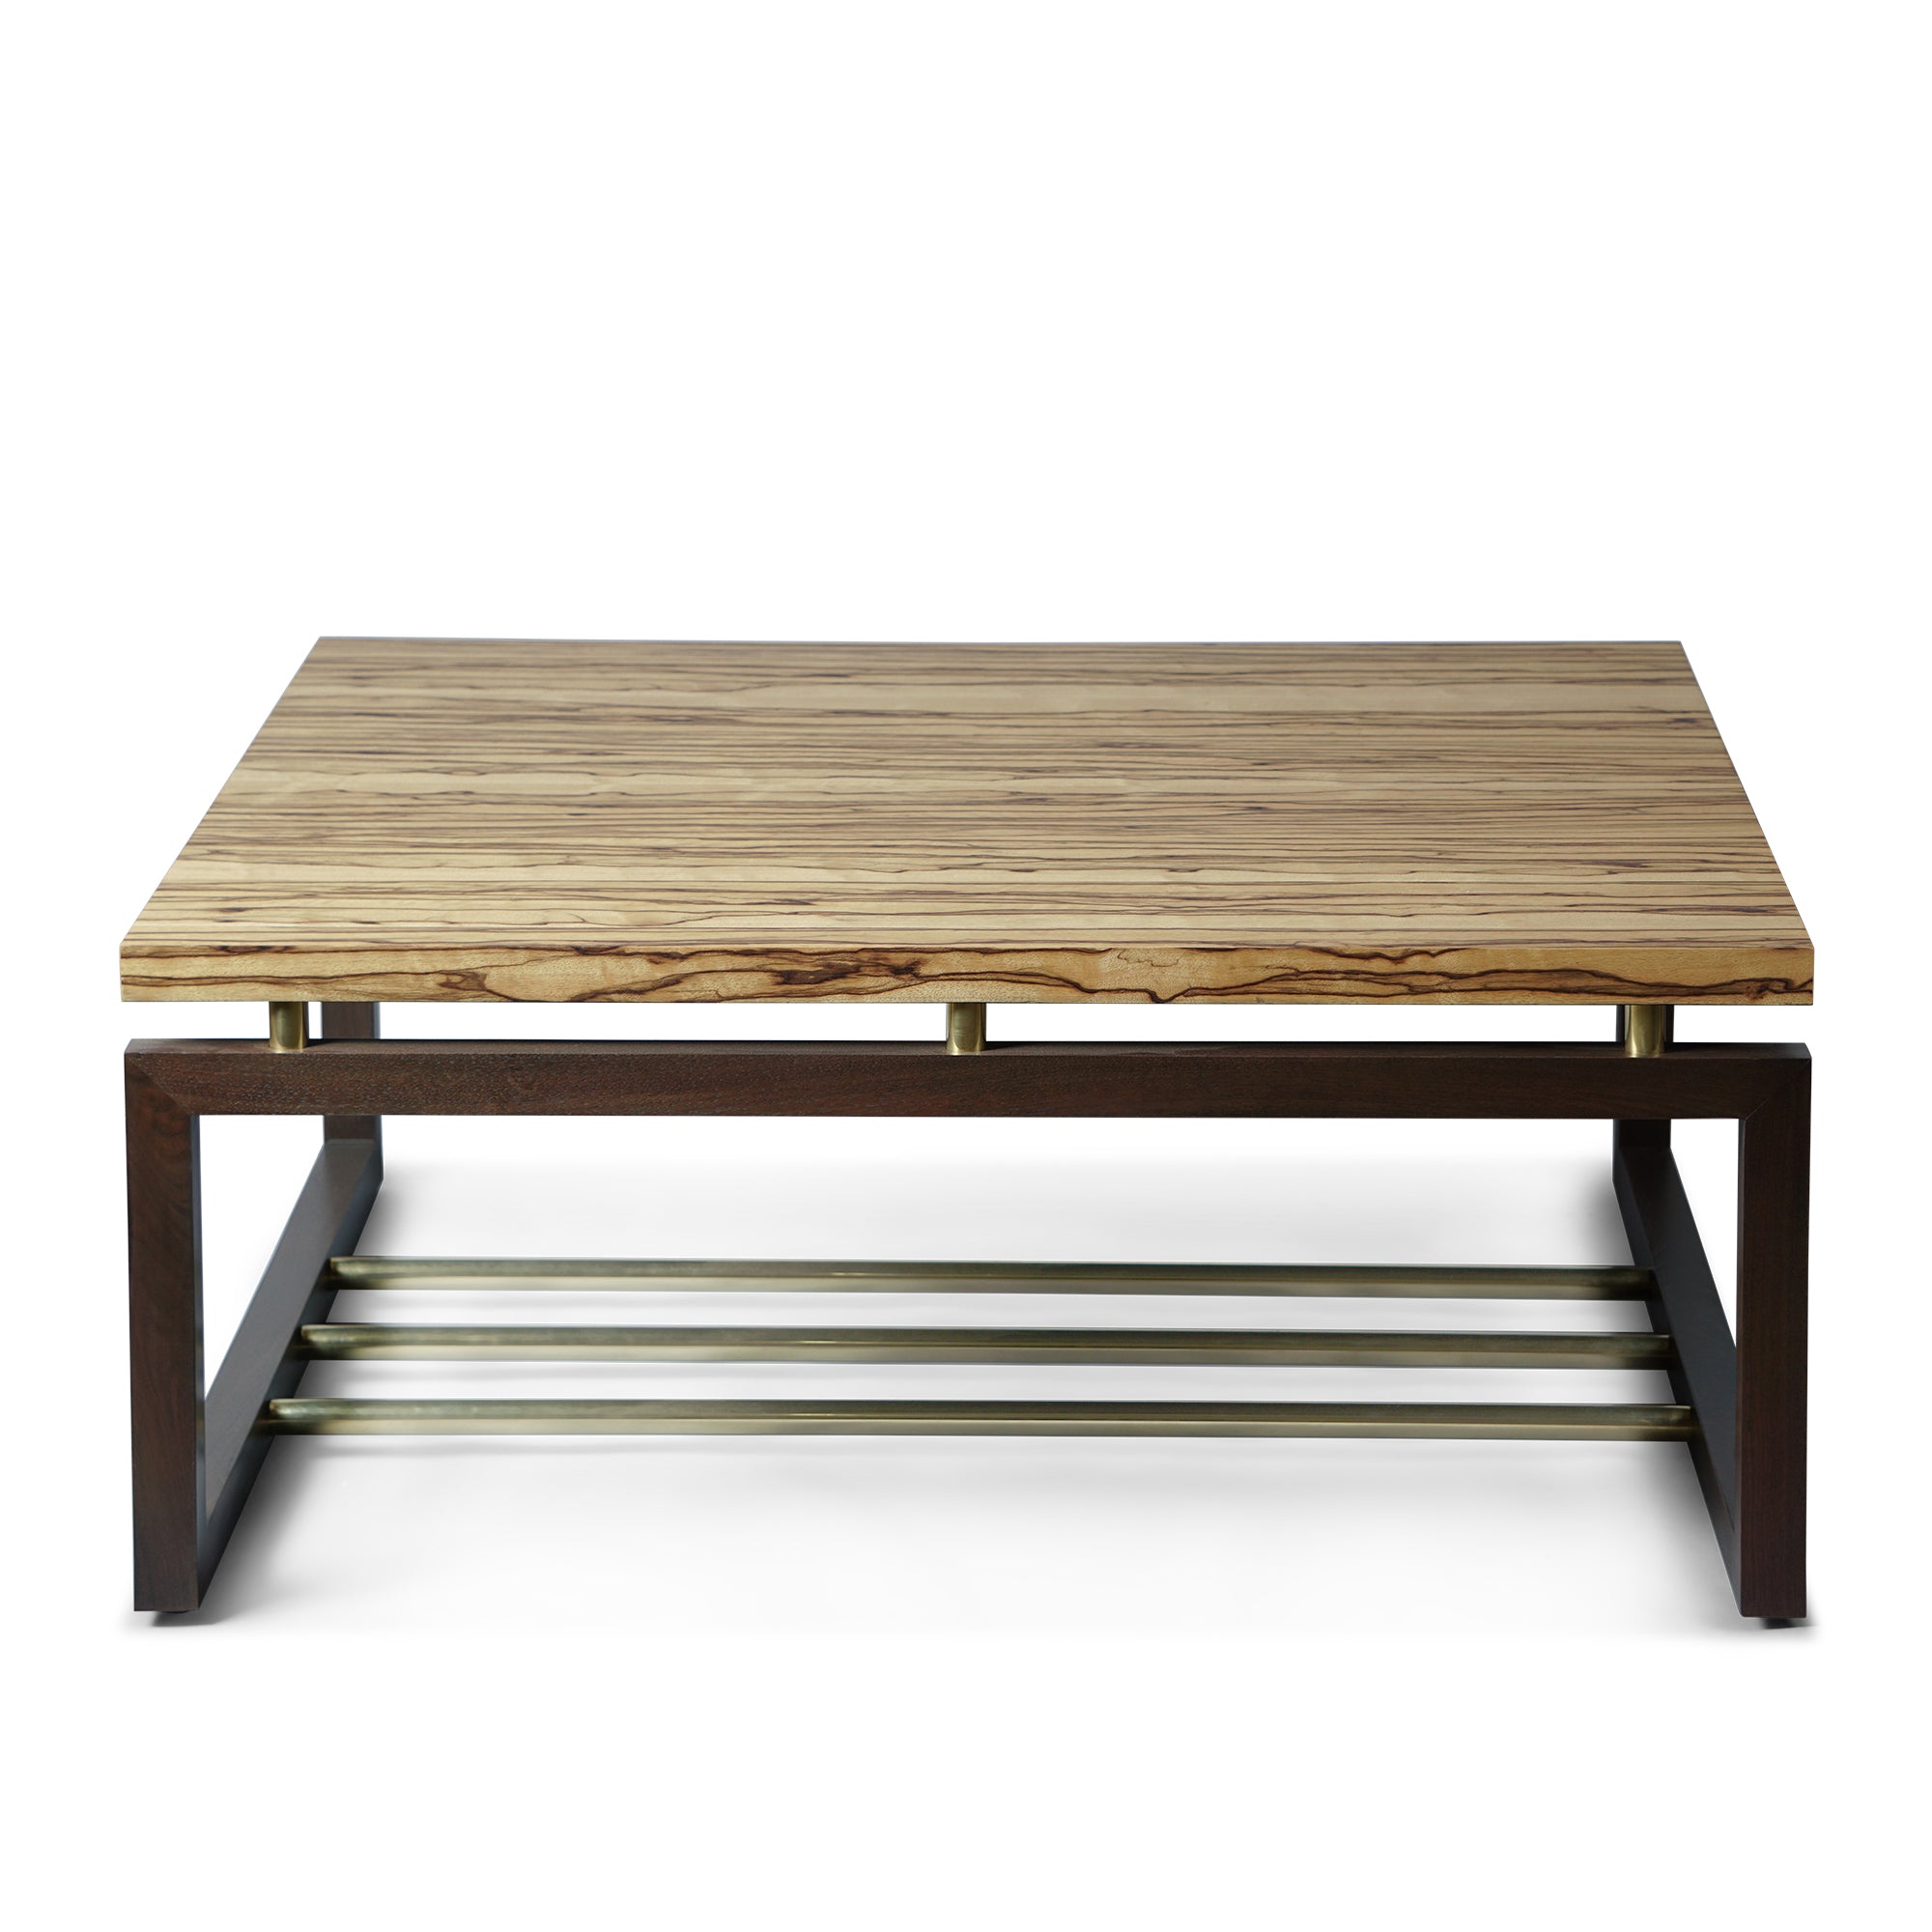 Black limba, walnut, and brass coffee table in matte lacquer.